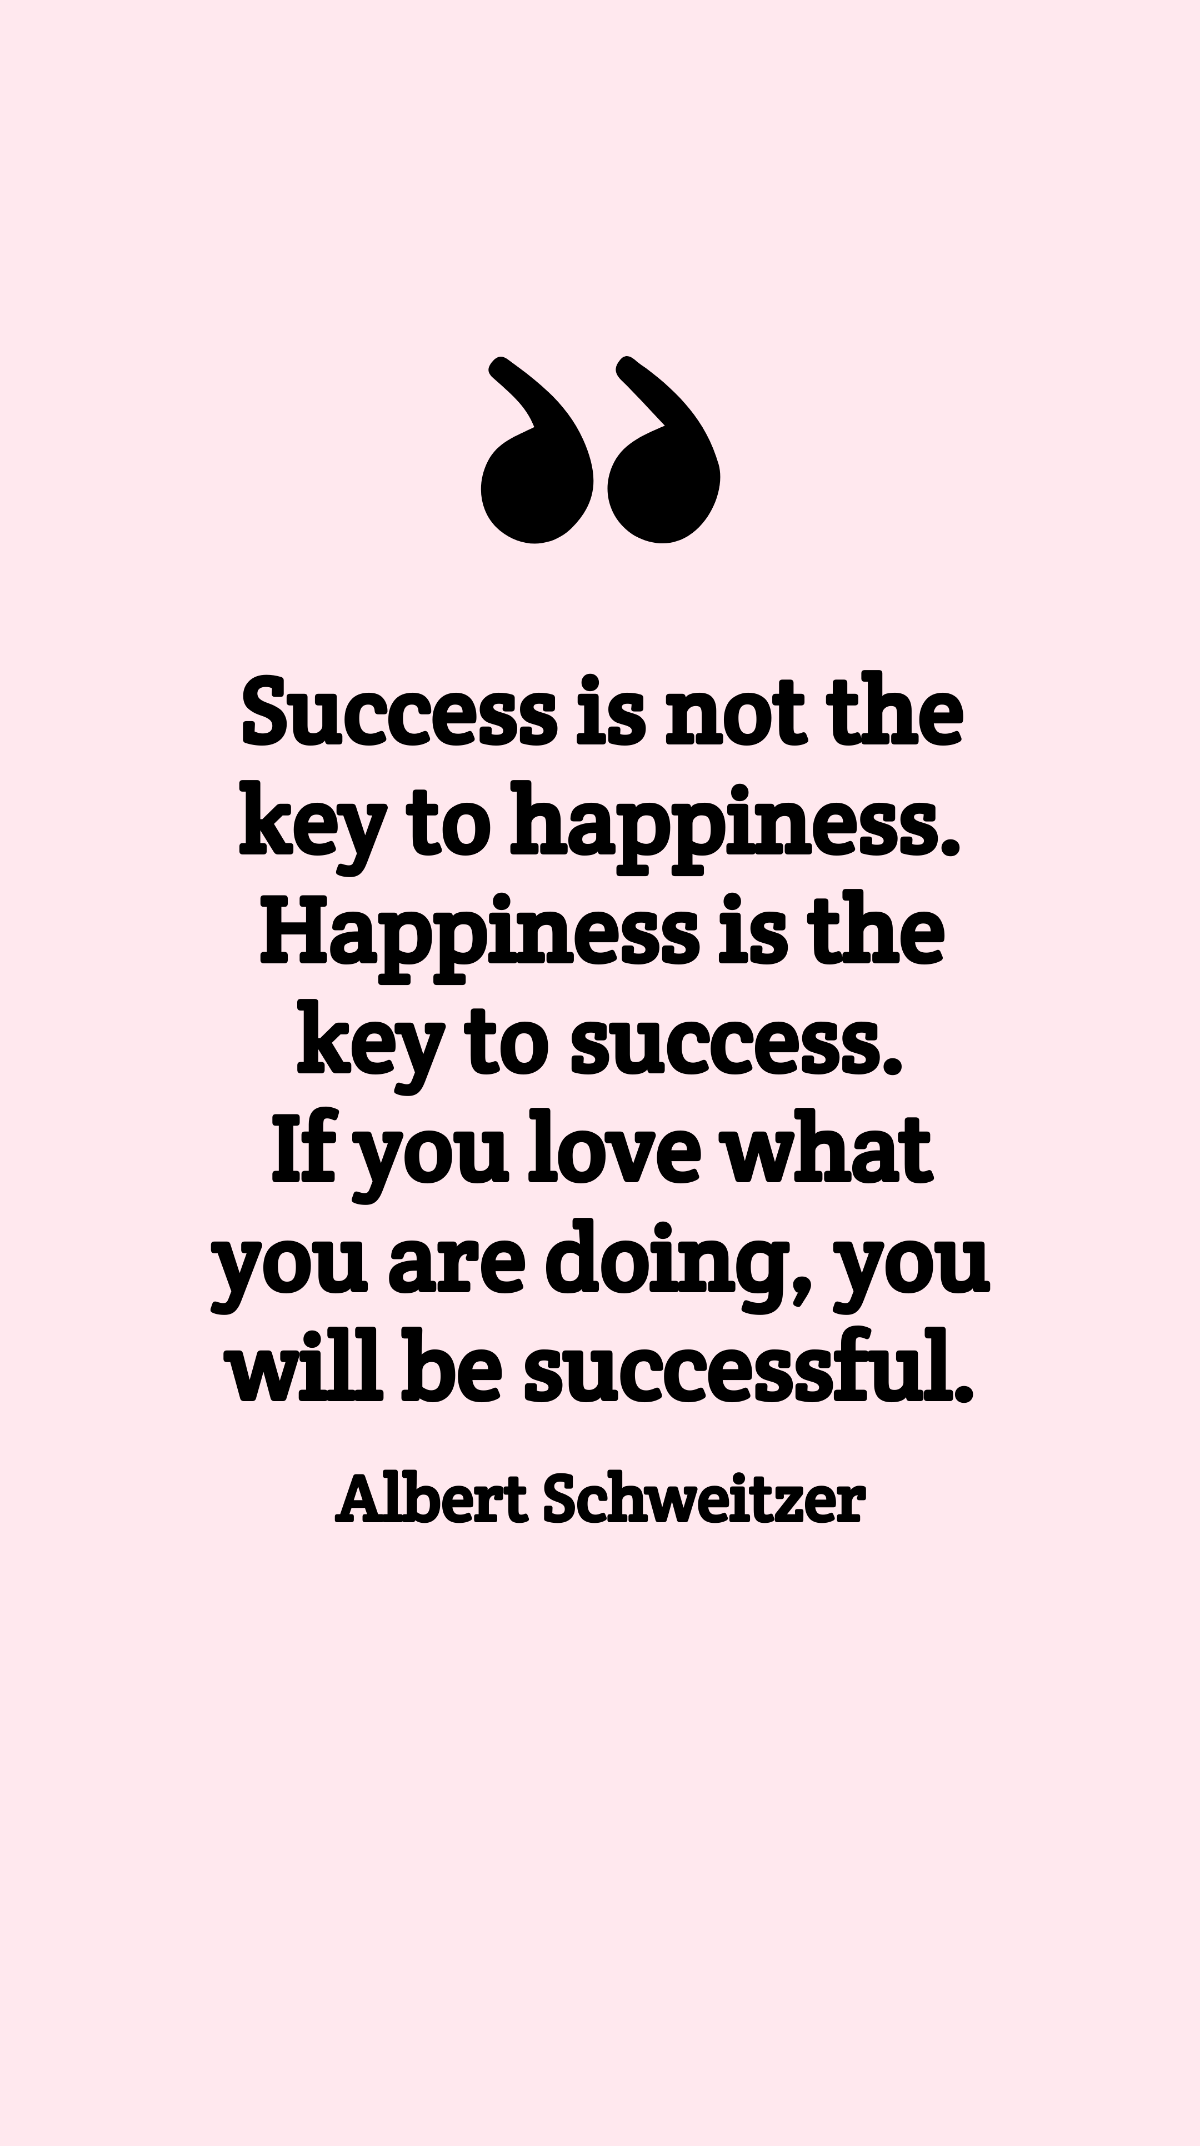 Albert Schweitzer - Success is not the key to happiness. Happiness is the key to success. If you love what you are doing, you will be successful.